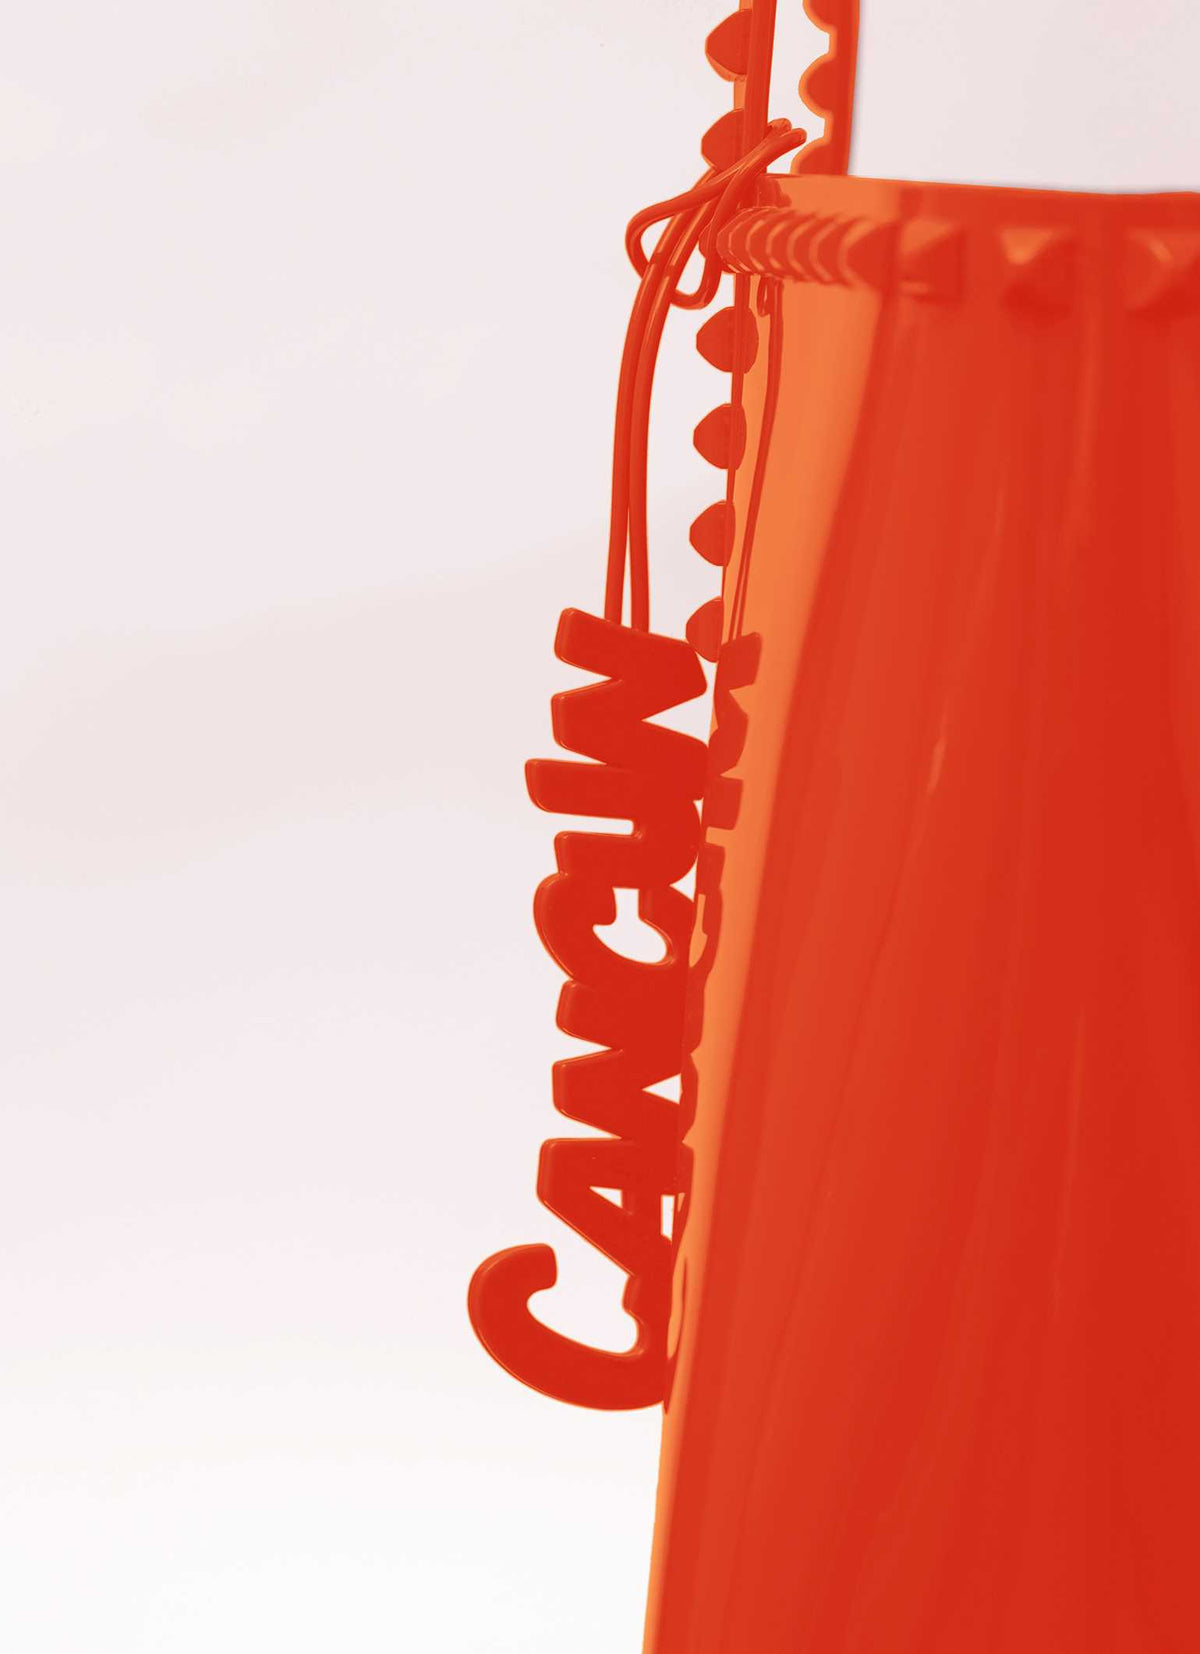 Carmen Sol Cancun jelly charms for purses in color orange on sale